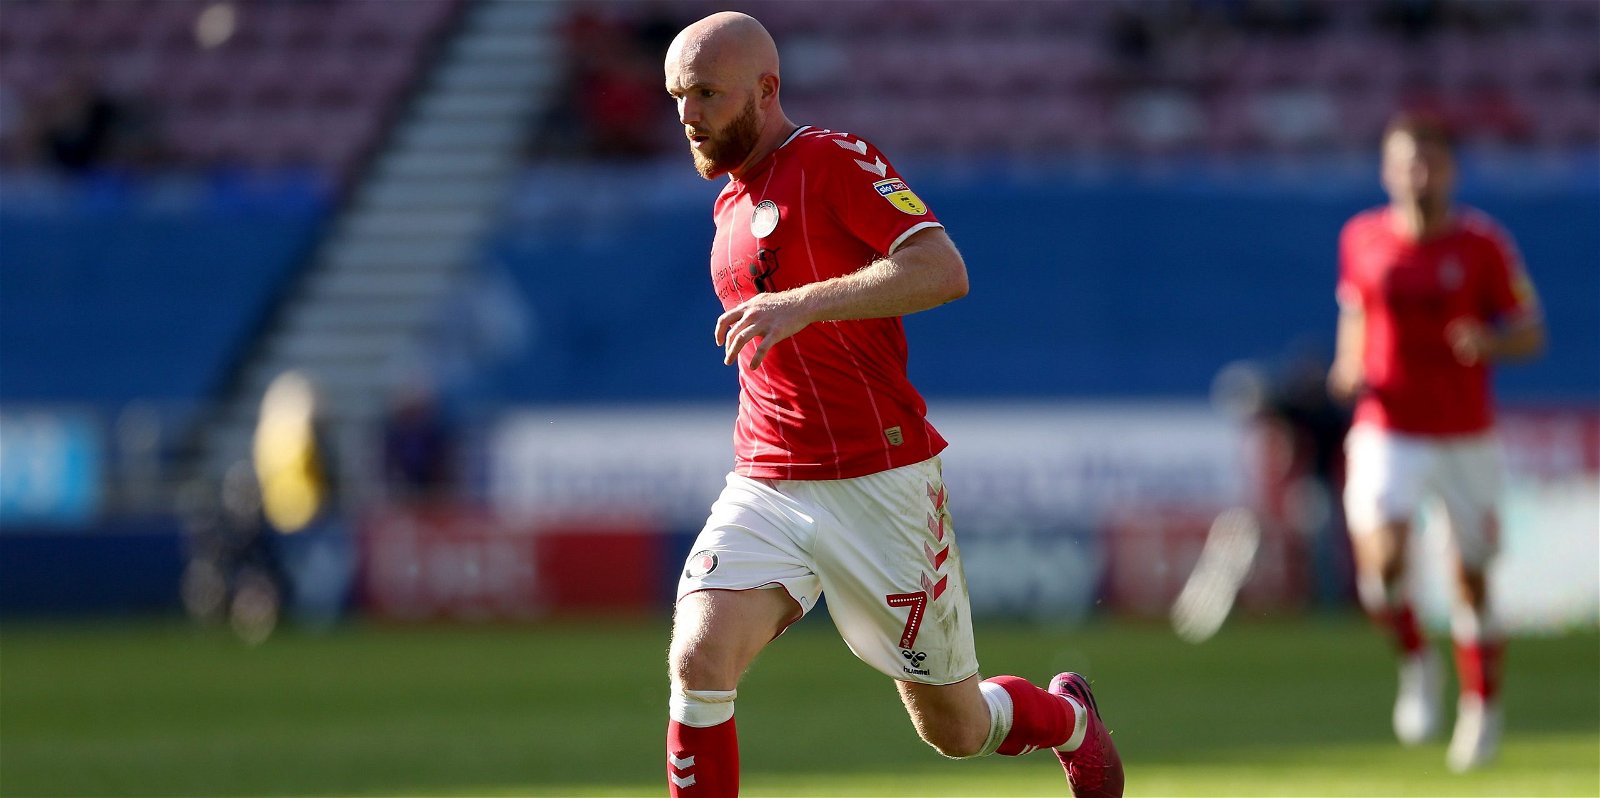 Charlton Athletic, Charlton Athletic could also lose Welsh midfielder for free